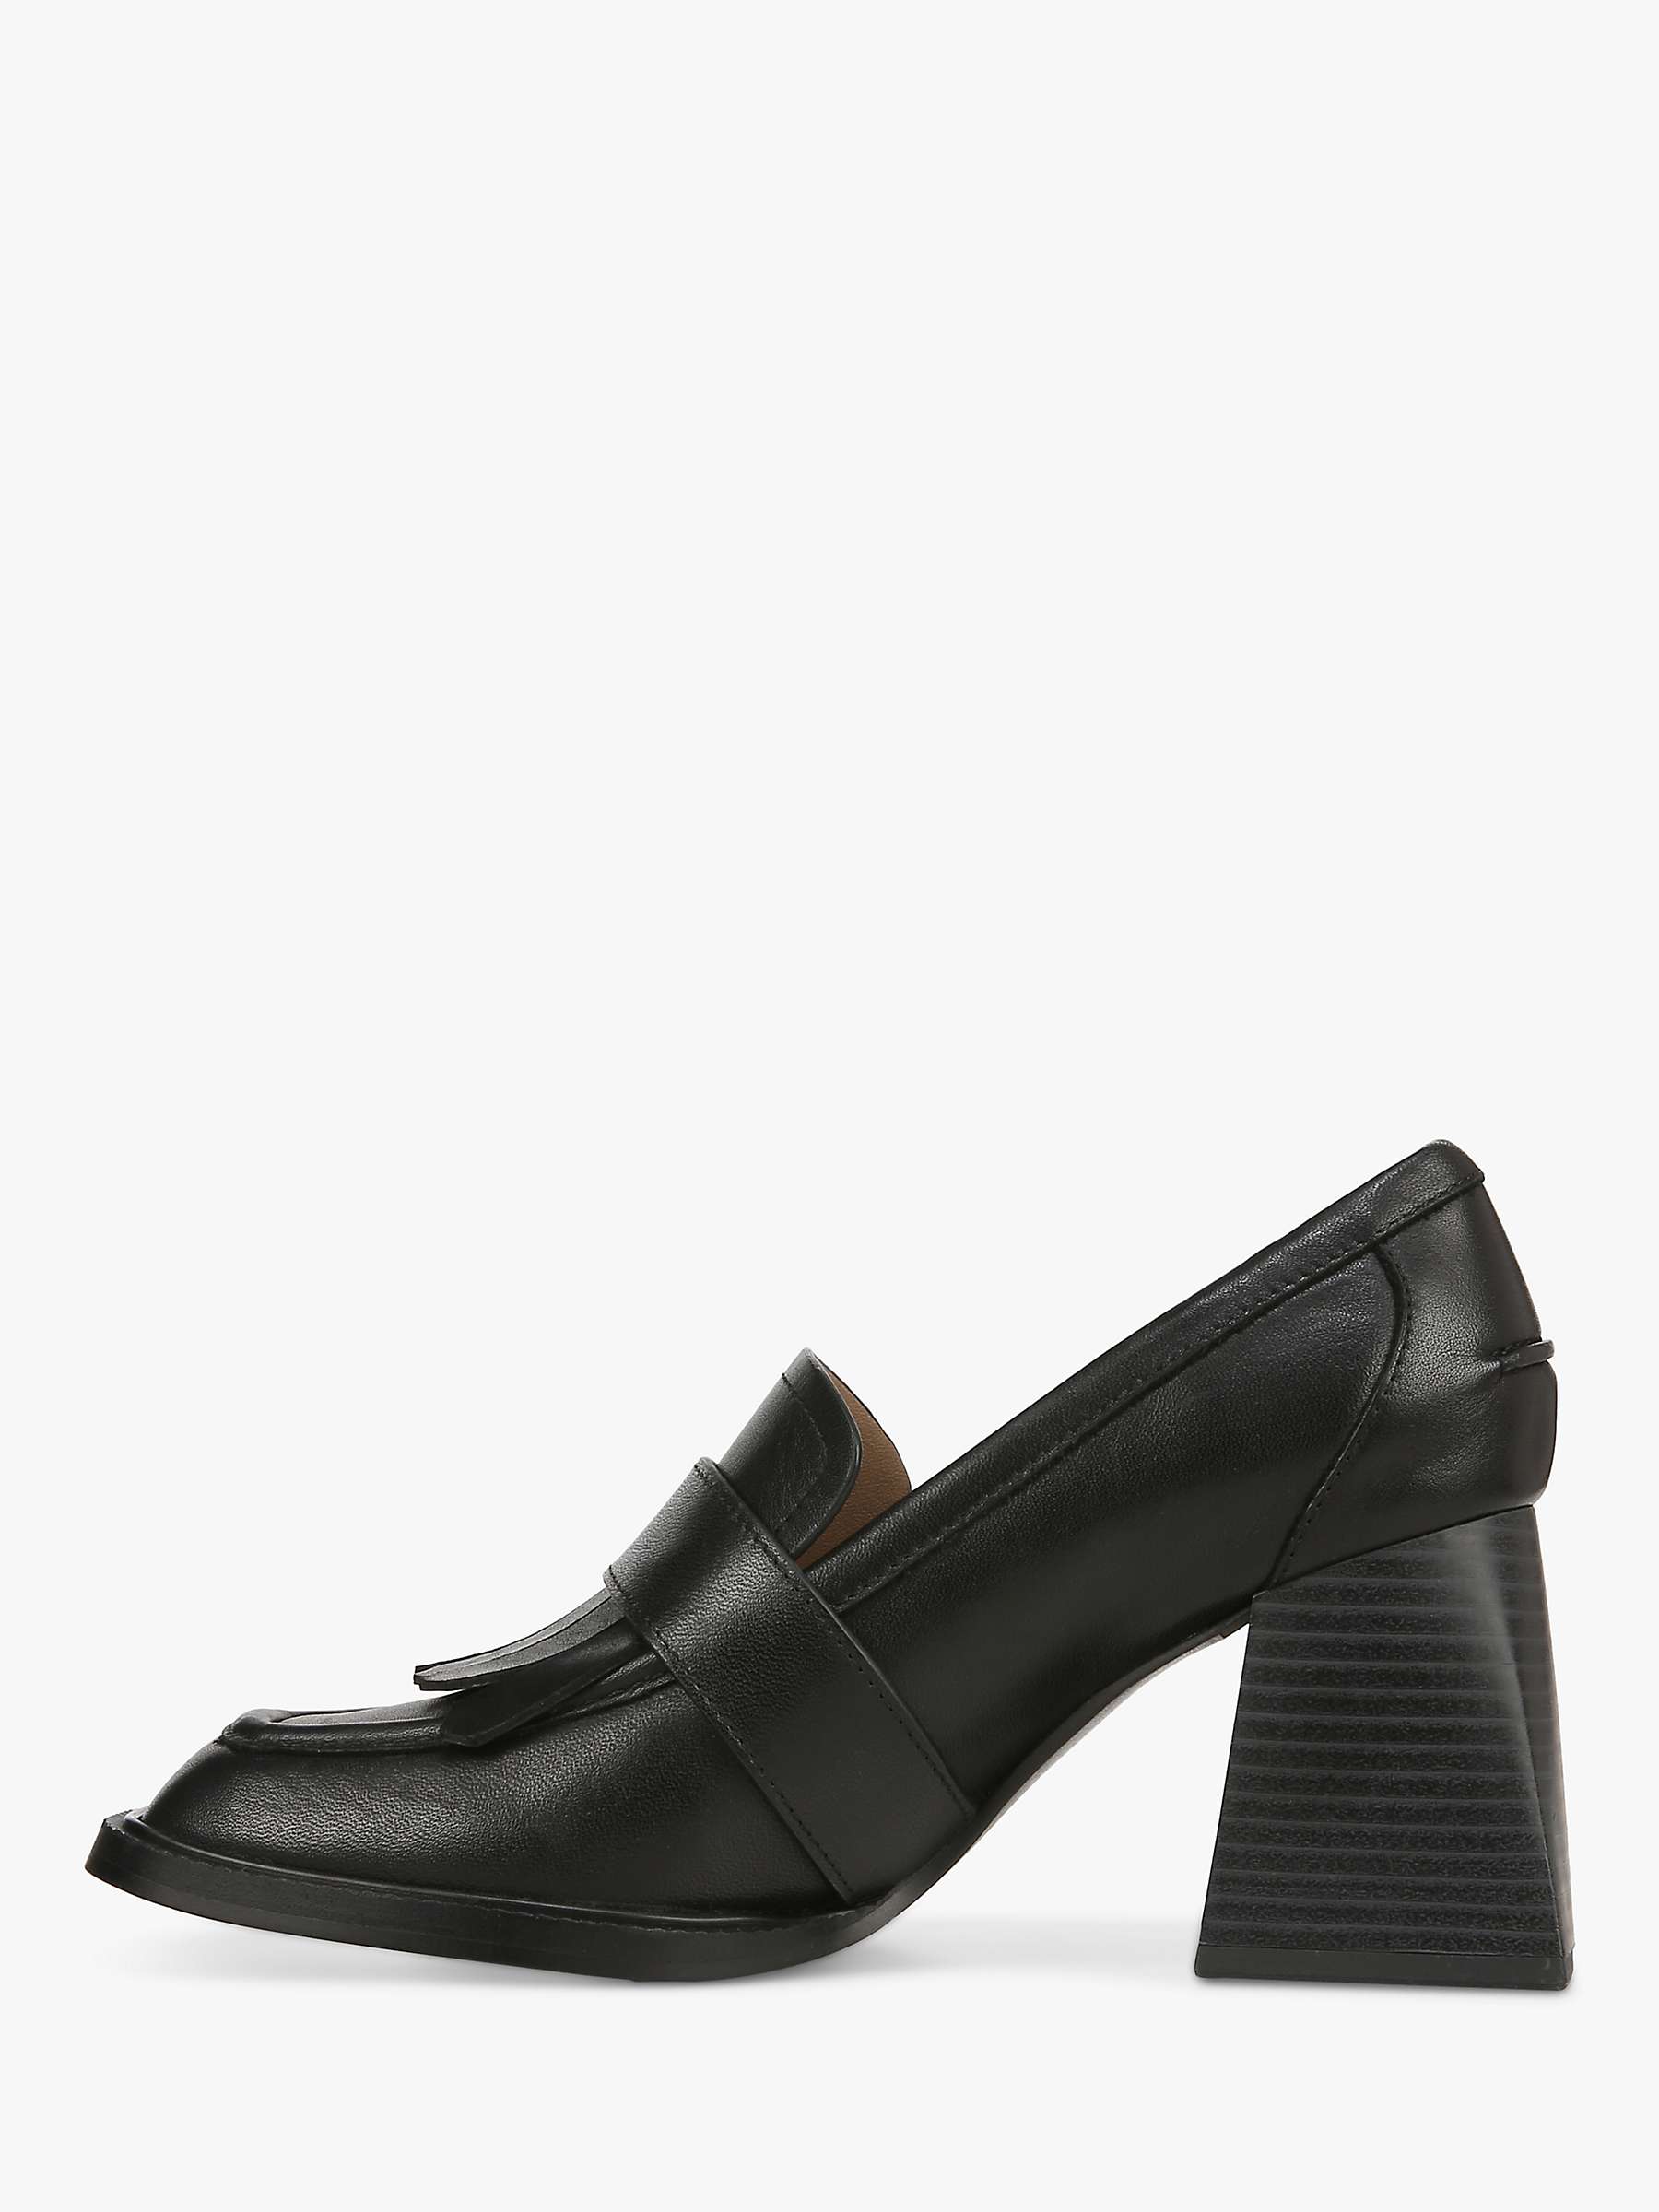 Sam Edelman Quinly Heeled Loafers, Black at John Lewis & Partners